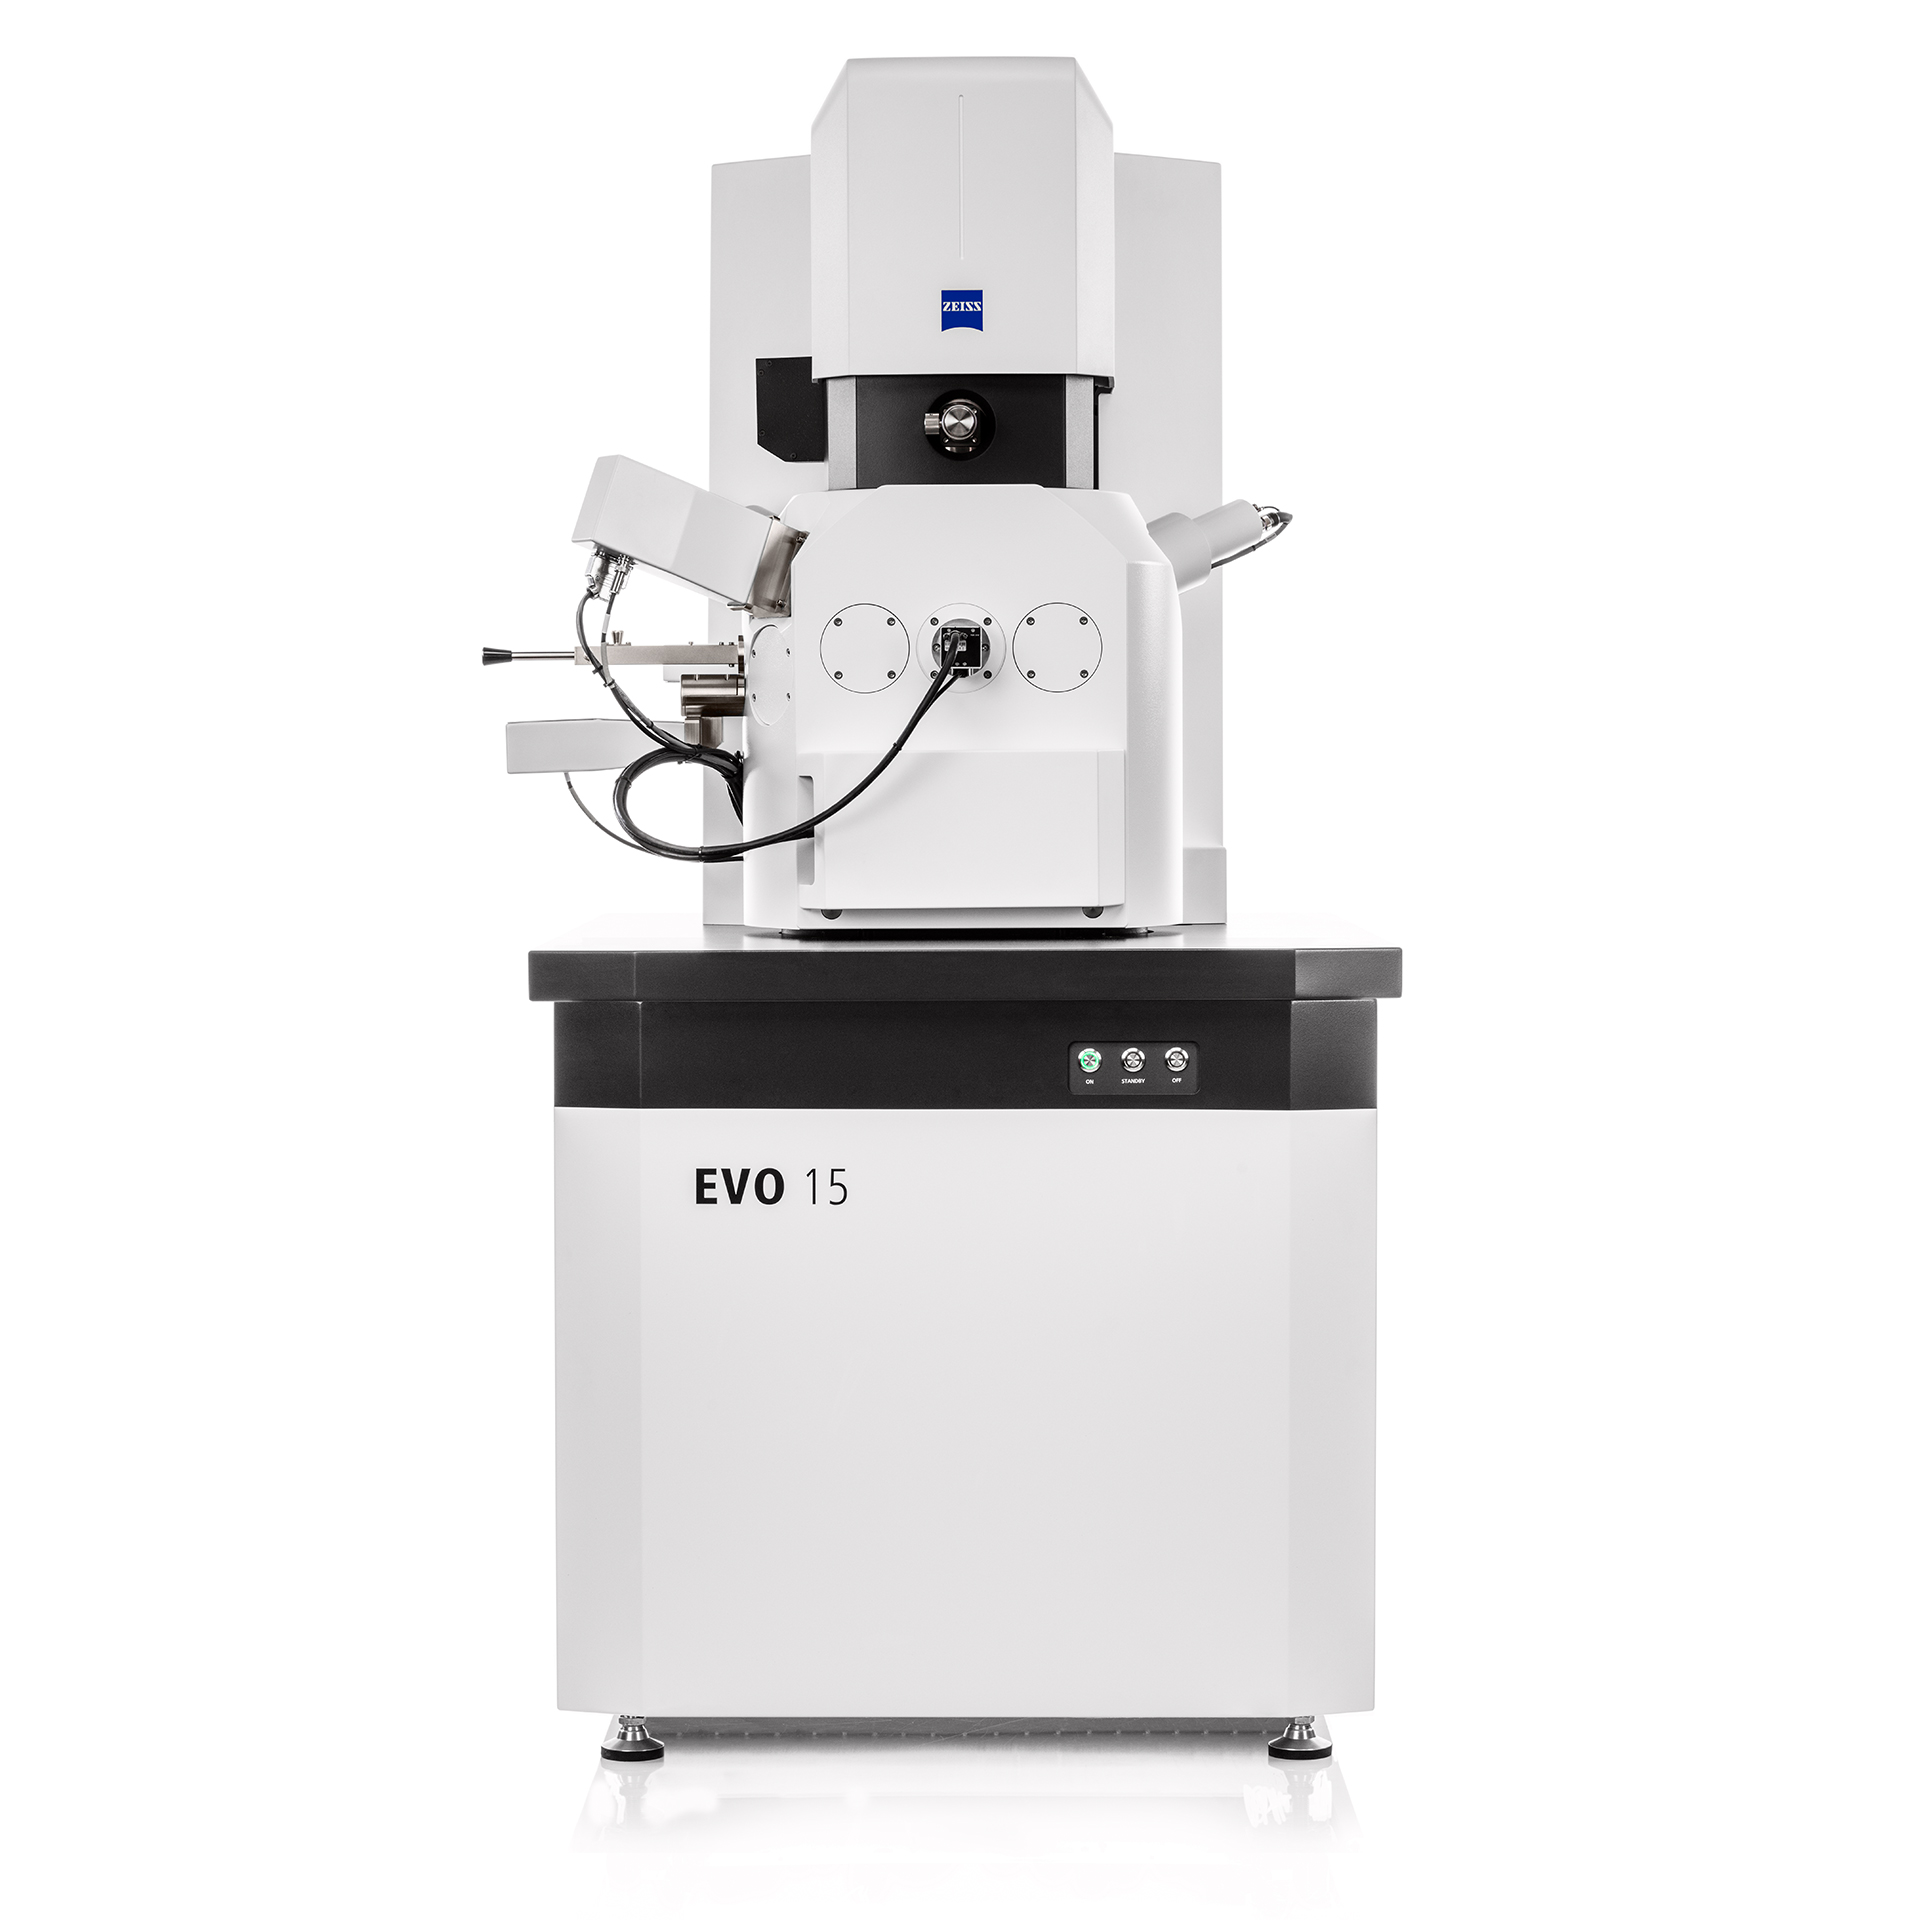 ZEISS EVO - Modular SEM Platform for Intuitive Operation, Routine Investigations and Research Applications